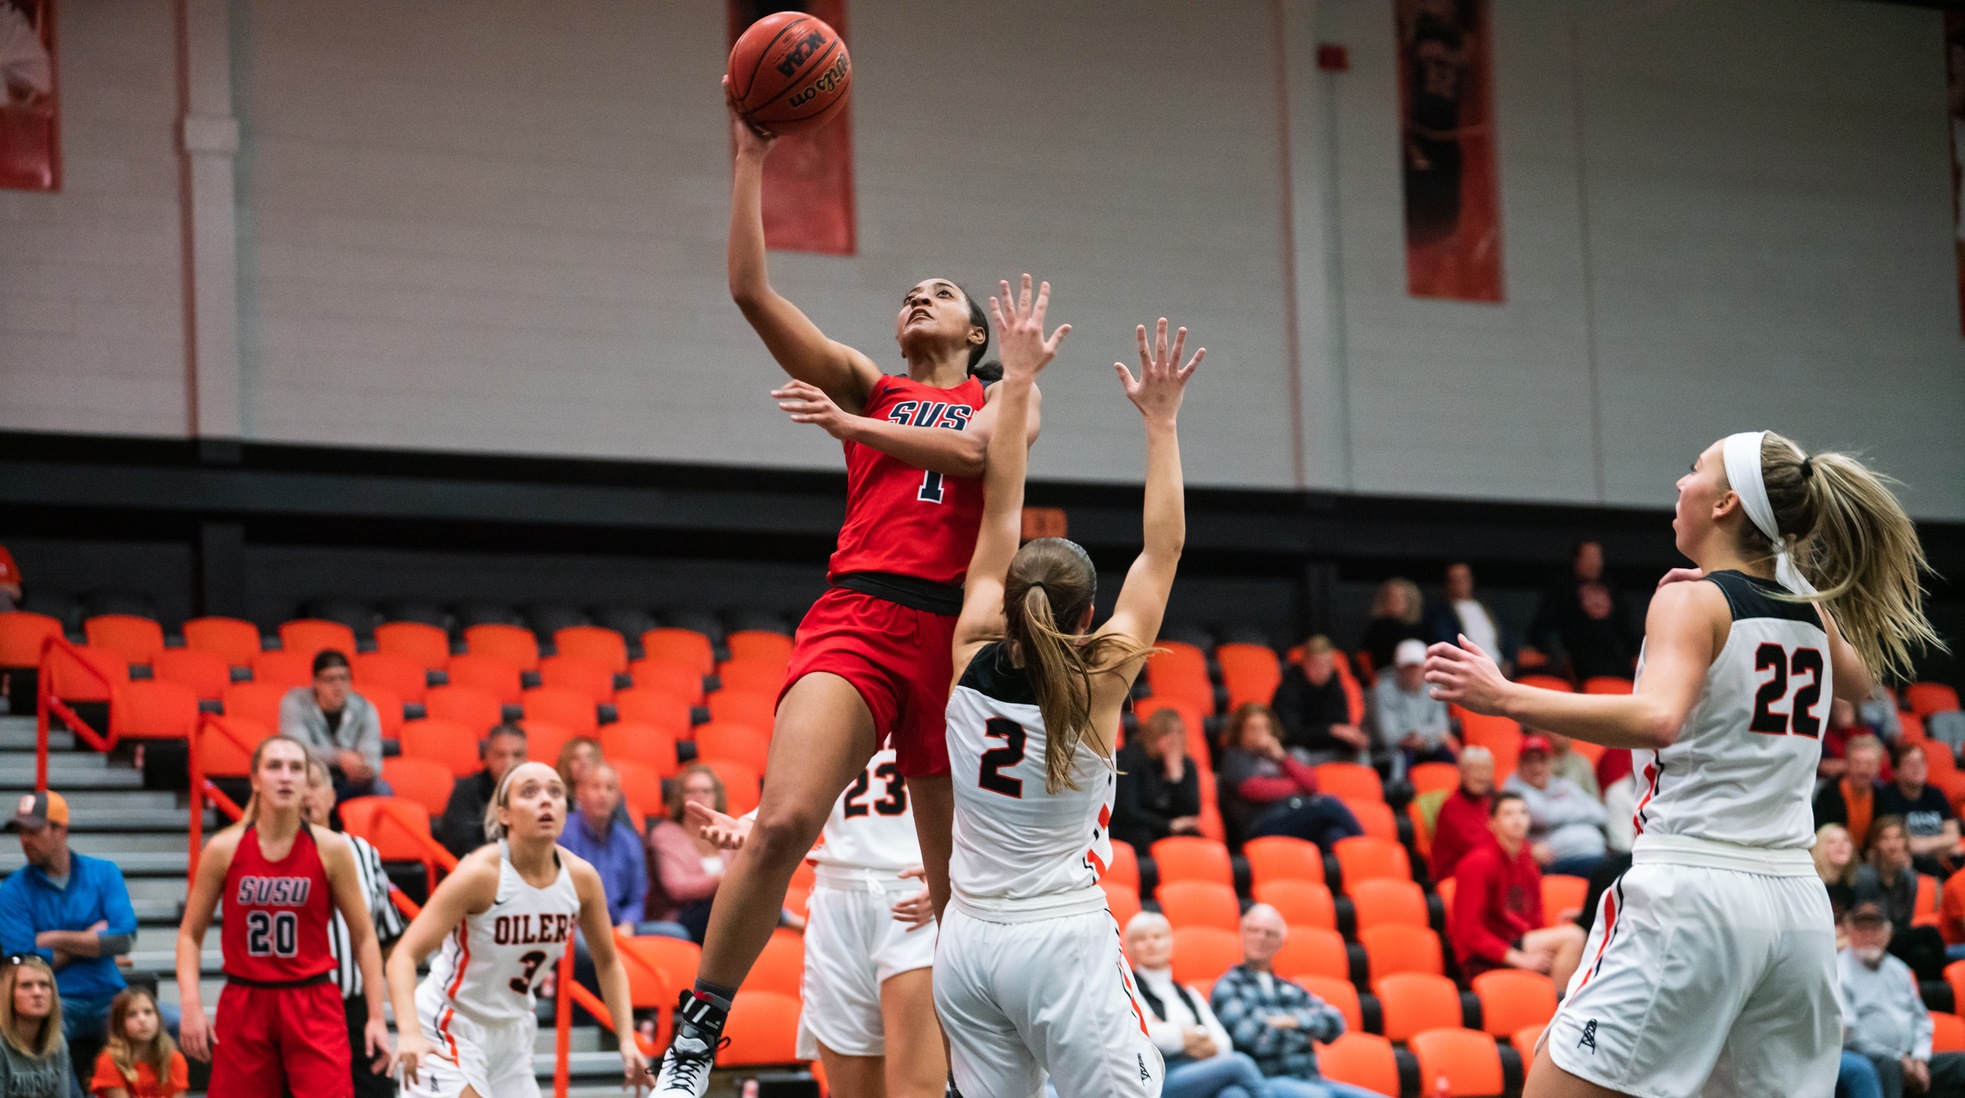 Fourth quarter comeback not enough as Cards fall 62-59 at Findlay